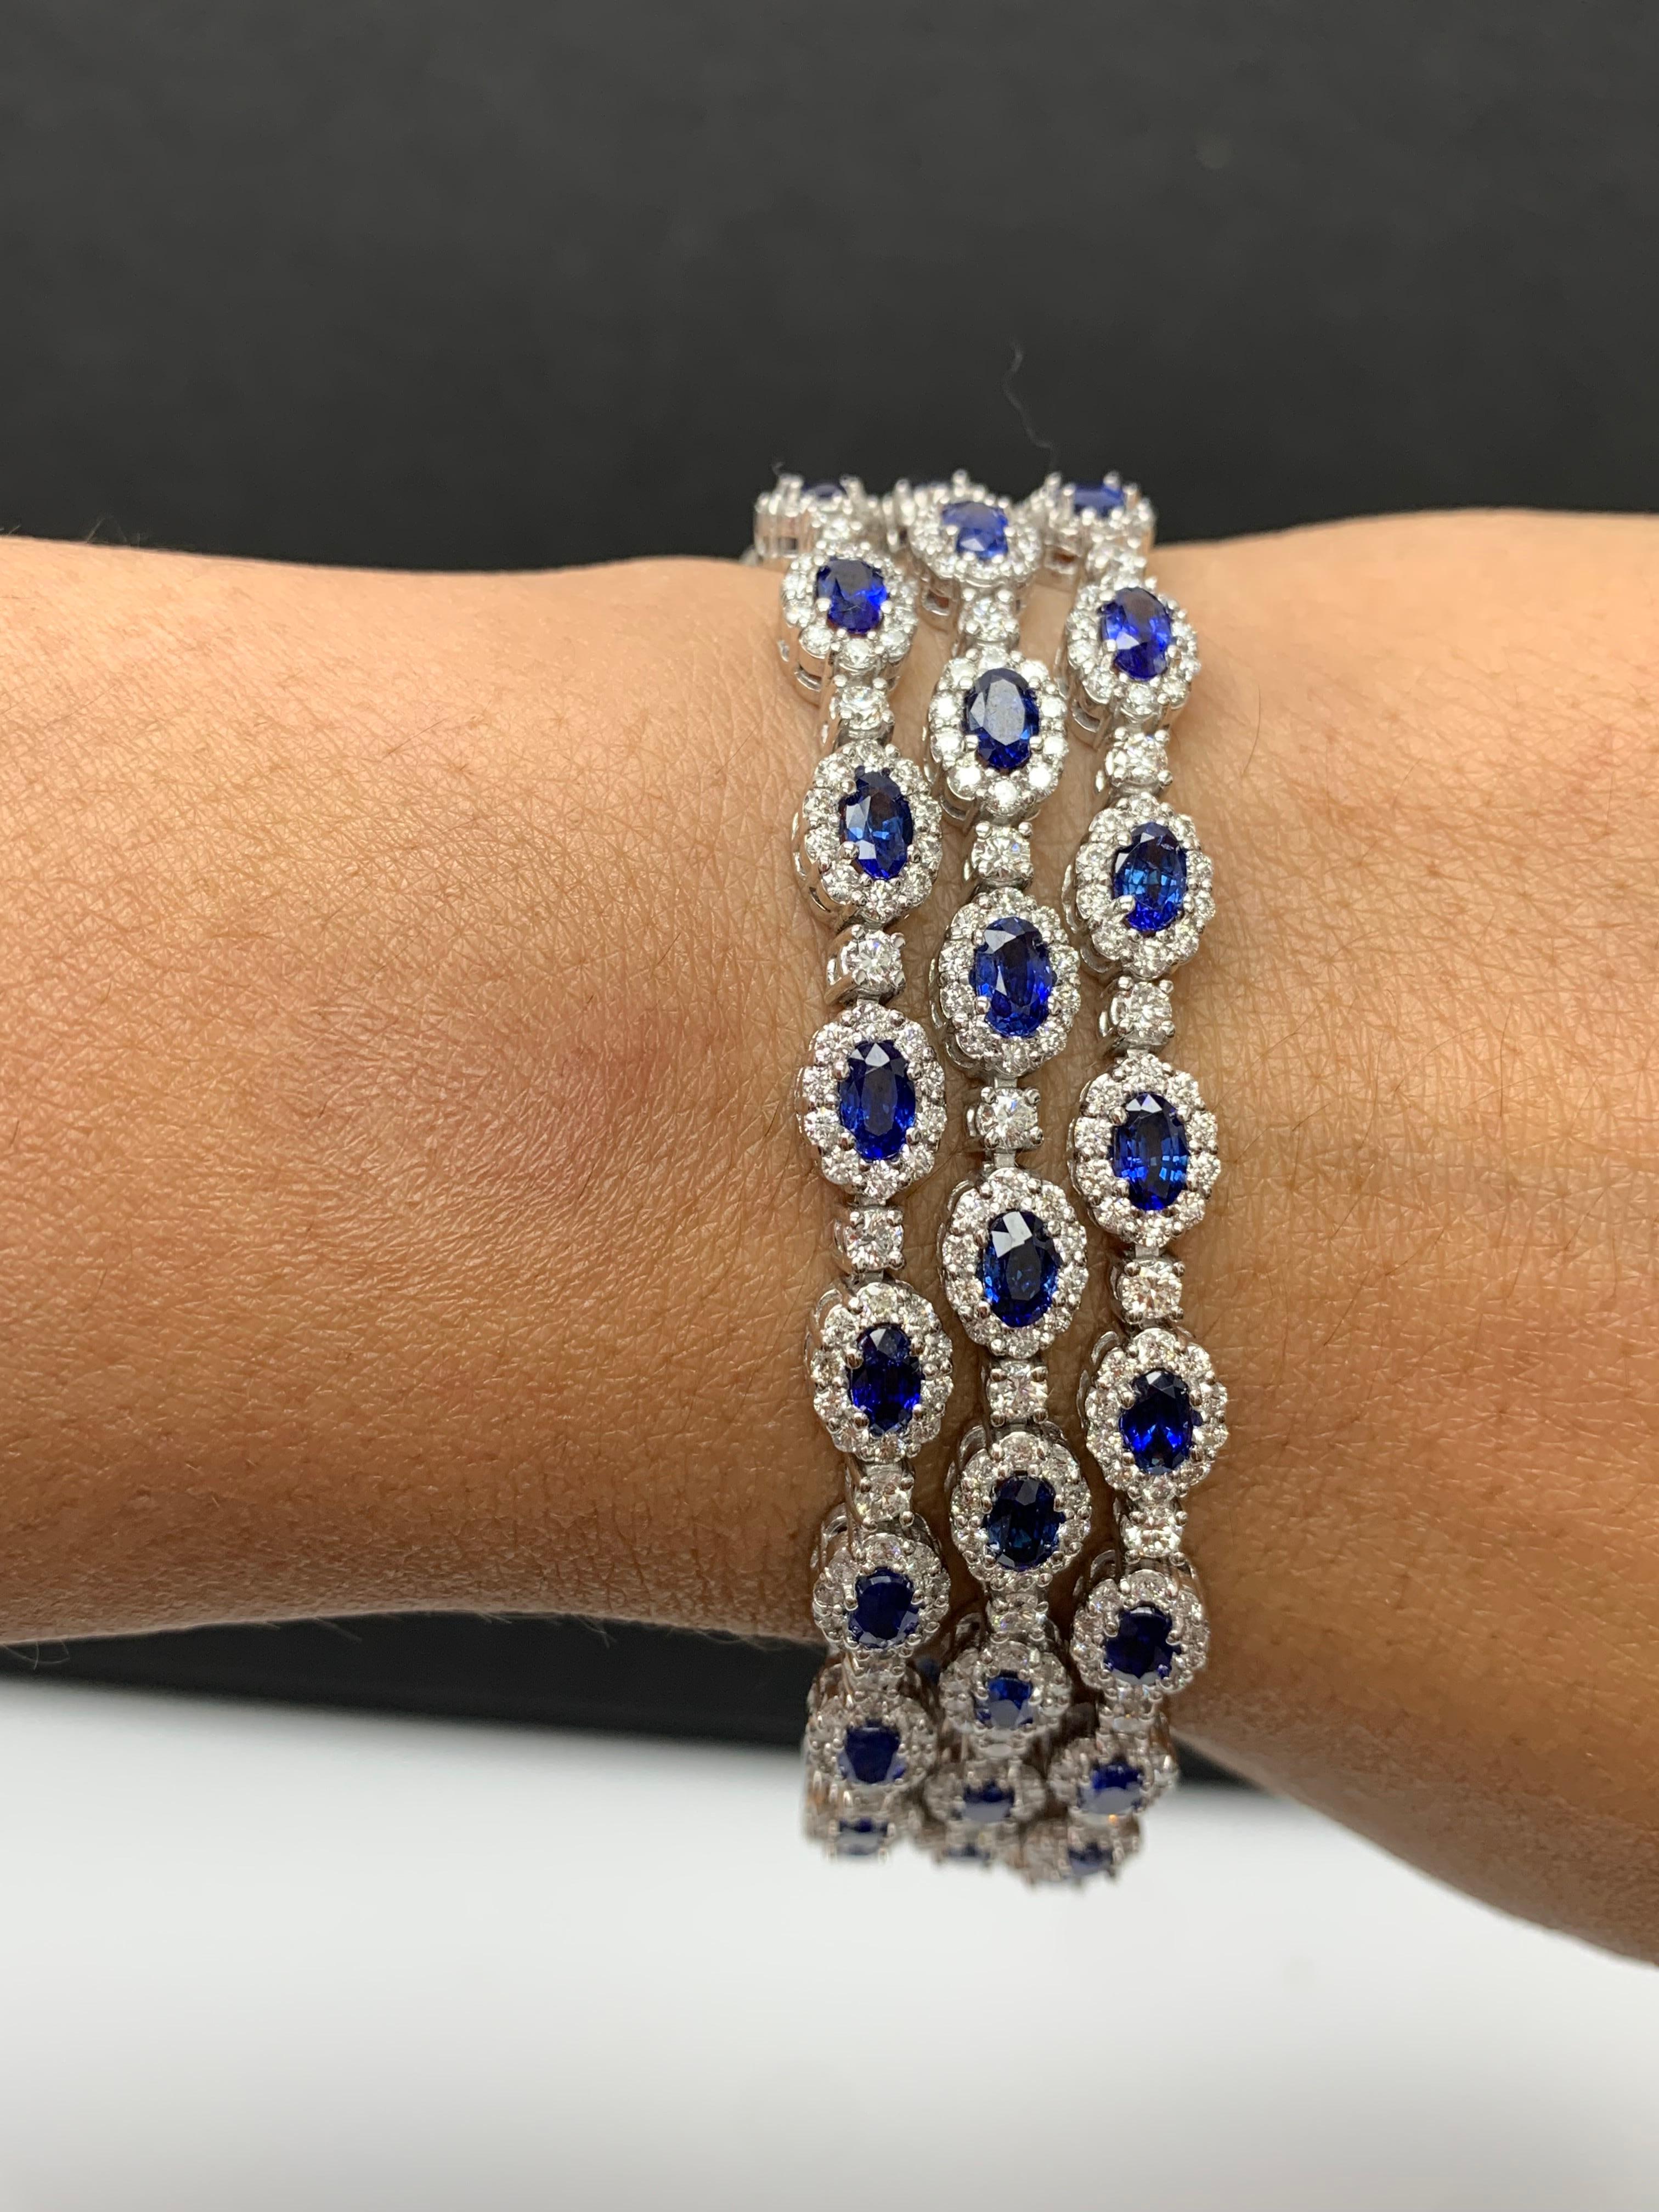 14.95 Carat Oval Cut Blue Sapphires and Diamond 3 Row Bracelet in 14K White Gold For Sale 3